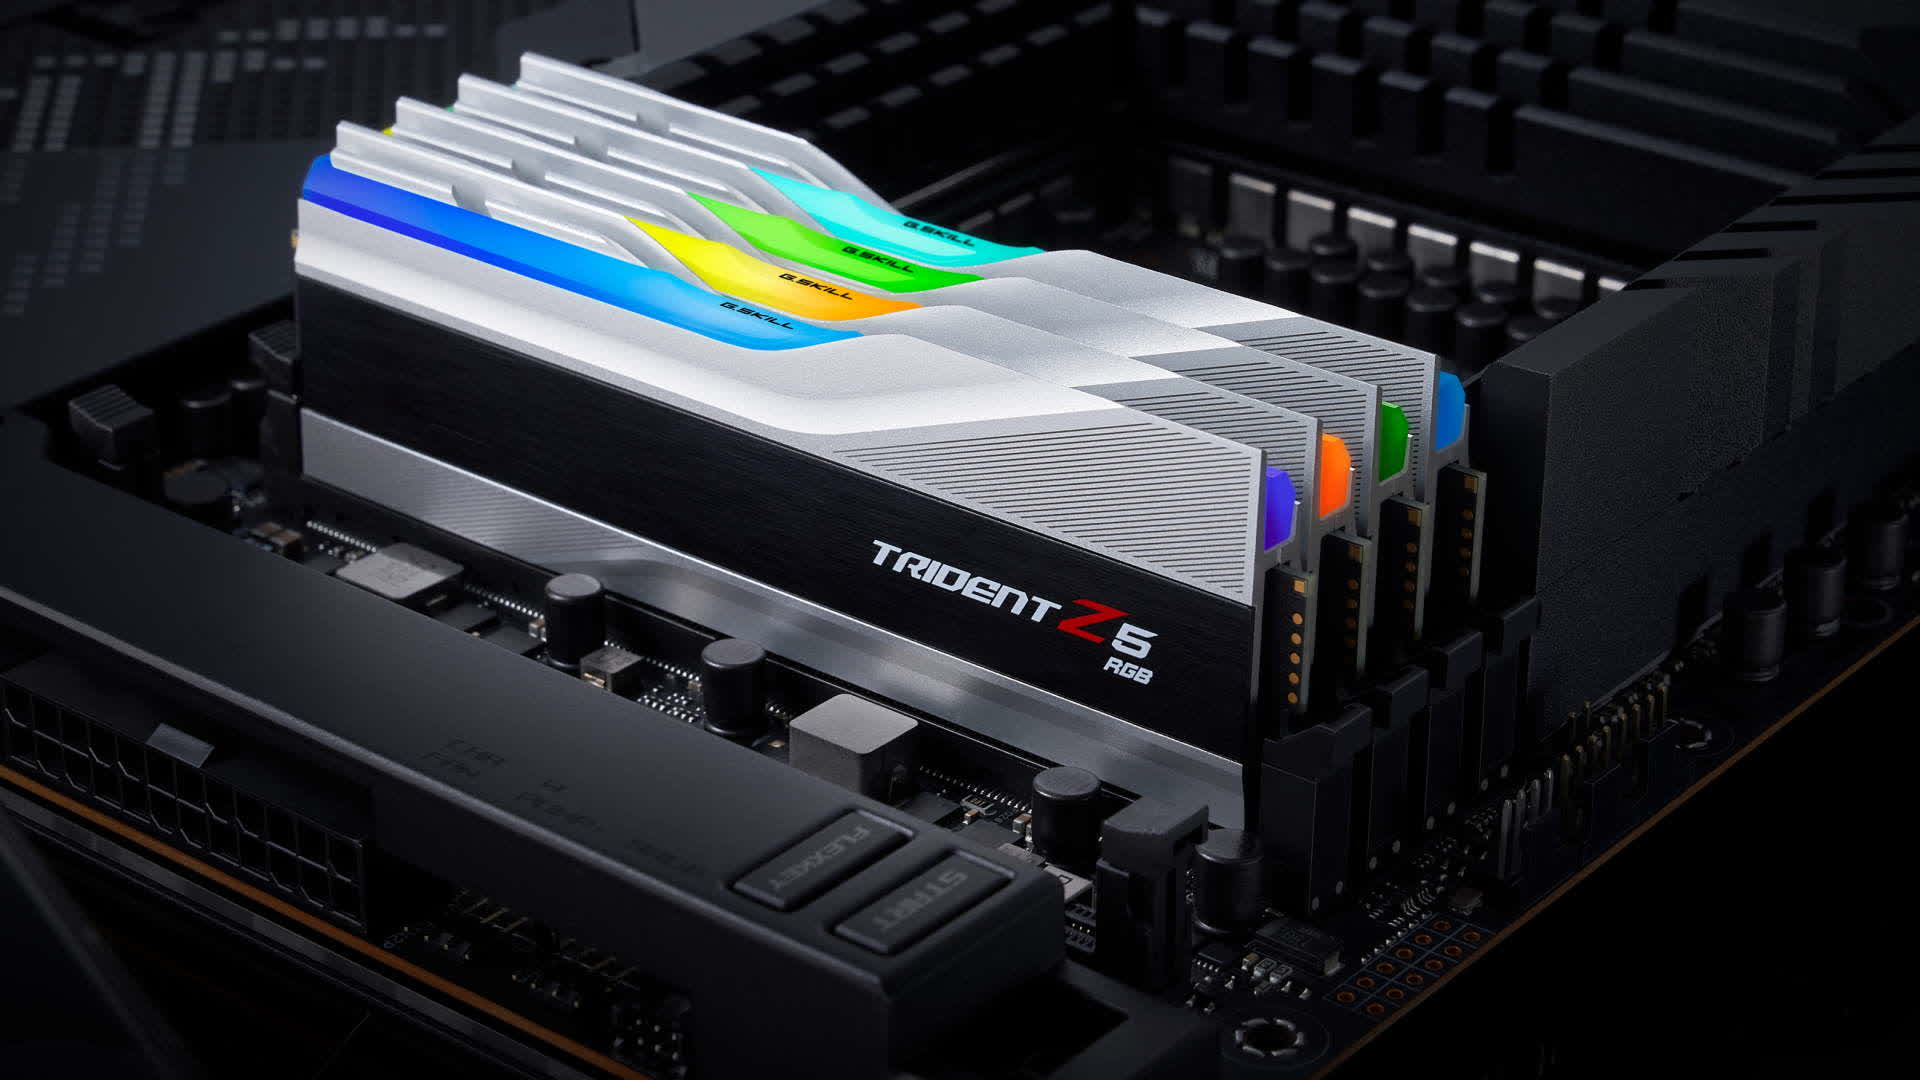 DDR5 prices expected to plunge and reach DDR4 pricing levels by 2023